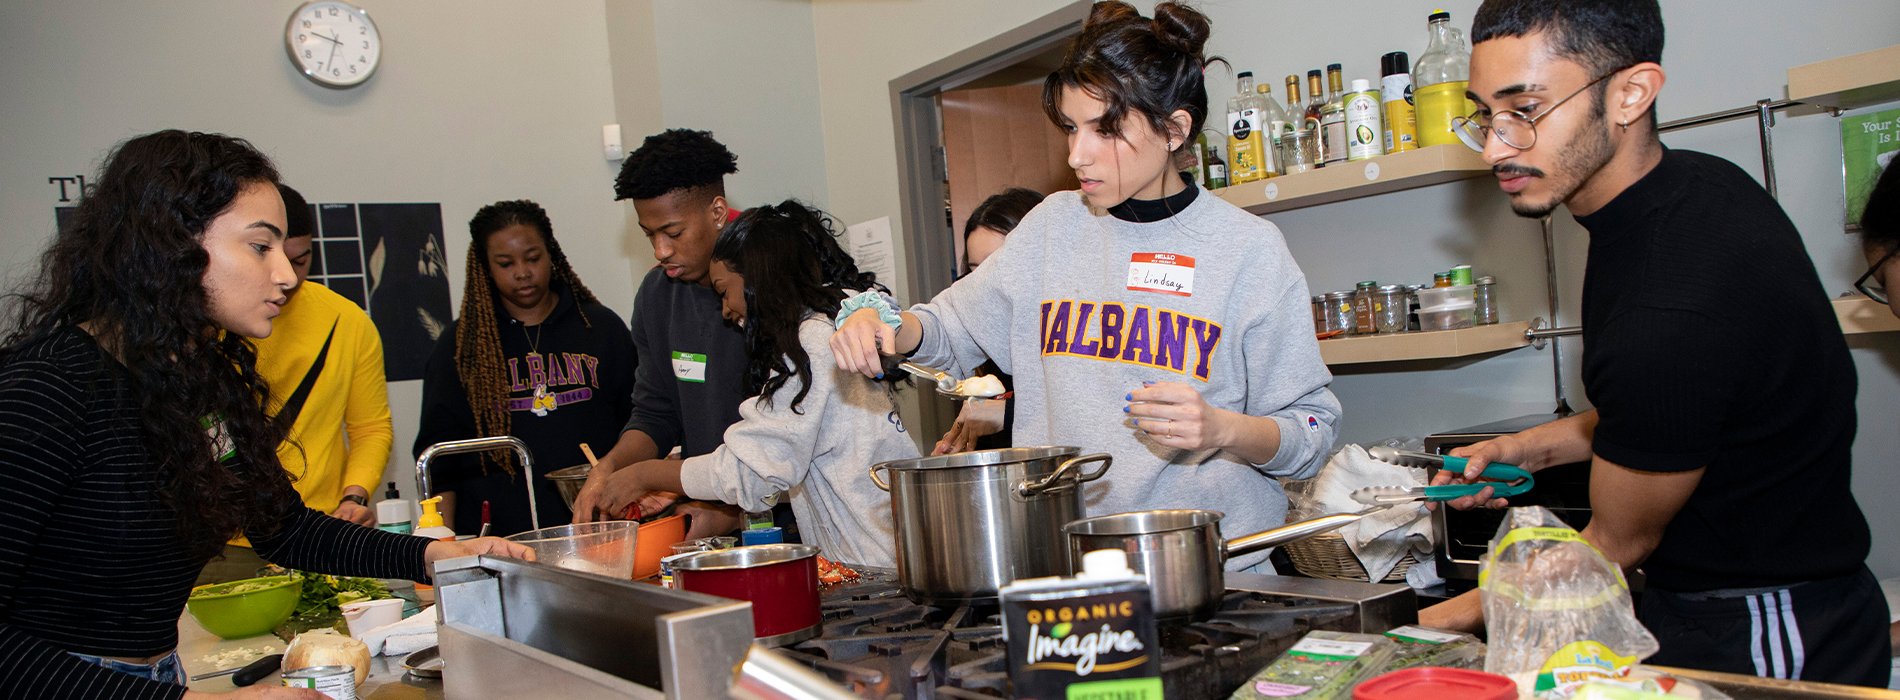 UAlbany students prepare food at the Honest Weight Food Coop kitchen